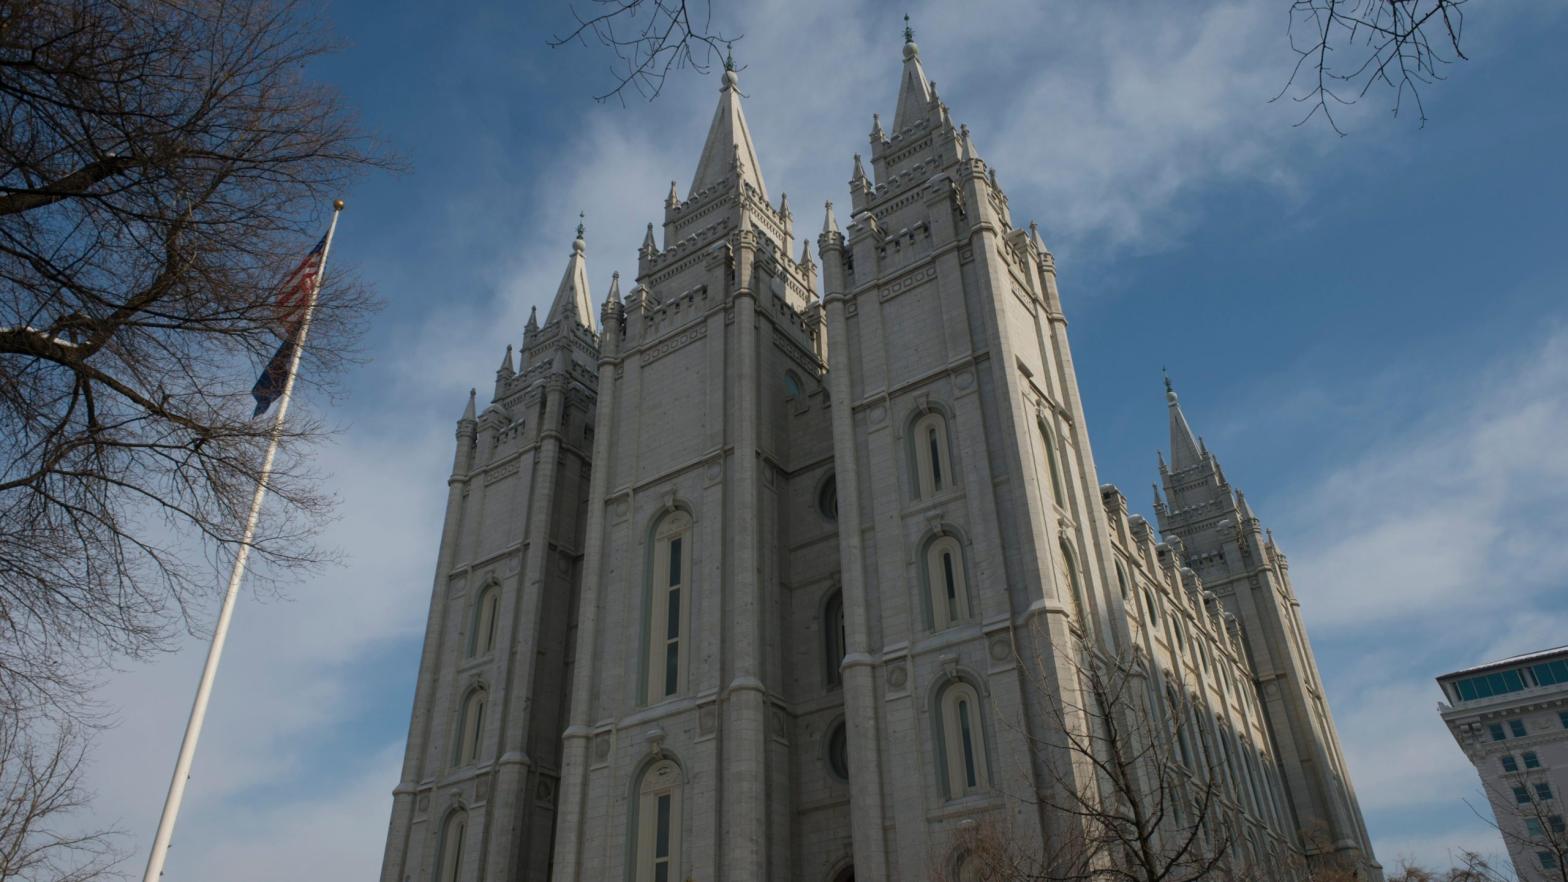 UNITED STATES - 2013/01/01: View of Salt Lake Temple on Historic Temple Square in Downtown Salt Lake City in Utah, USA. (Photo: Wolfgang Kaehler / Contributor, Getty Images)